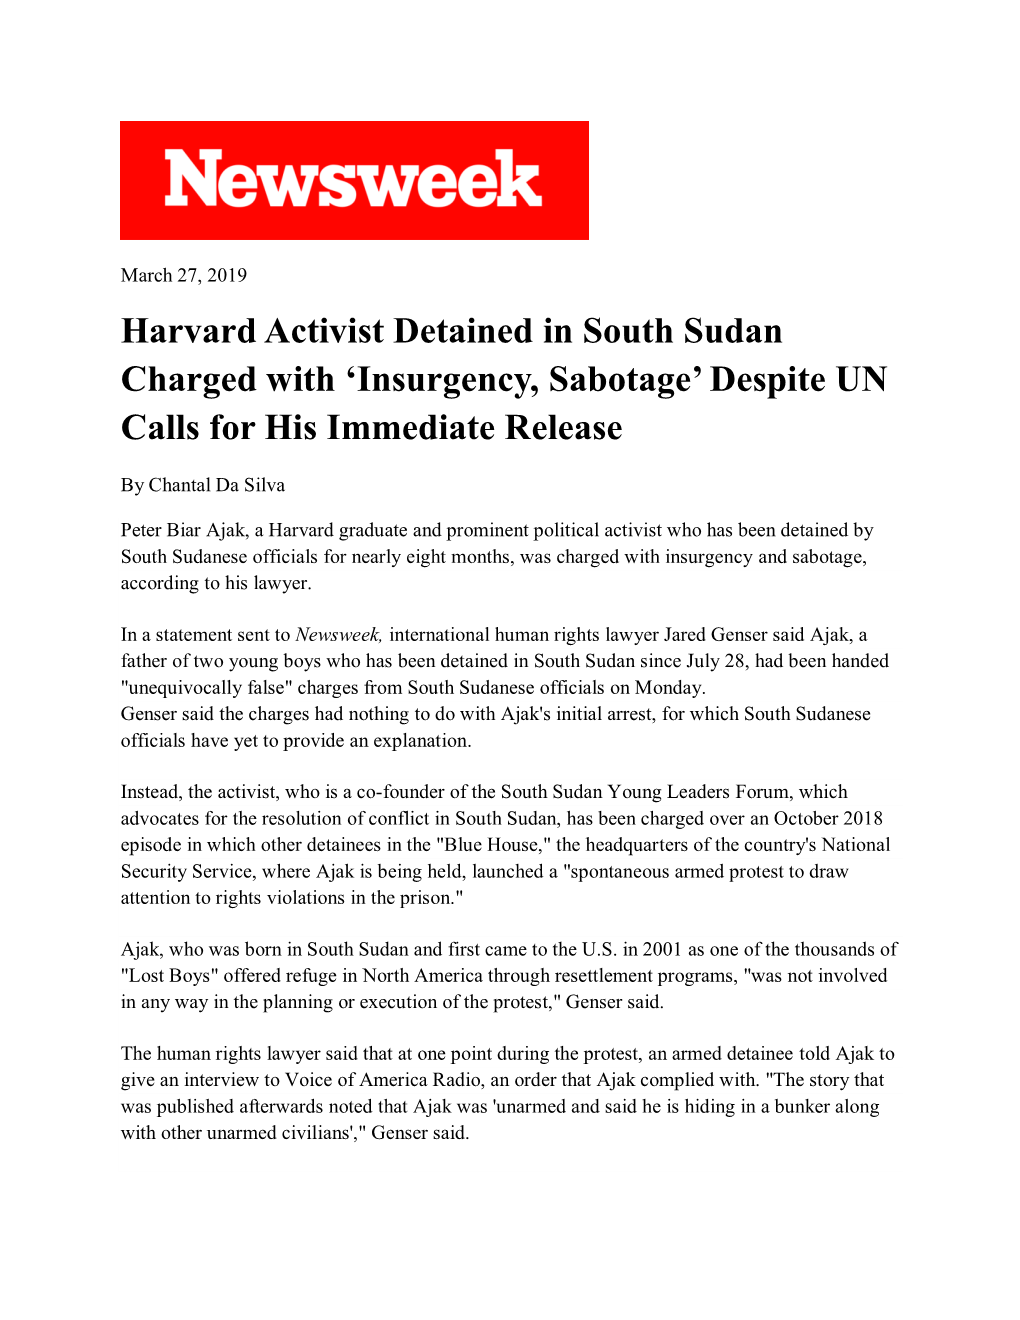 Harvard Activist Detained in South Sudan Charged with 'Insurgency